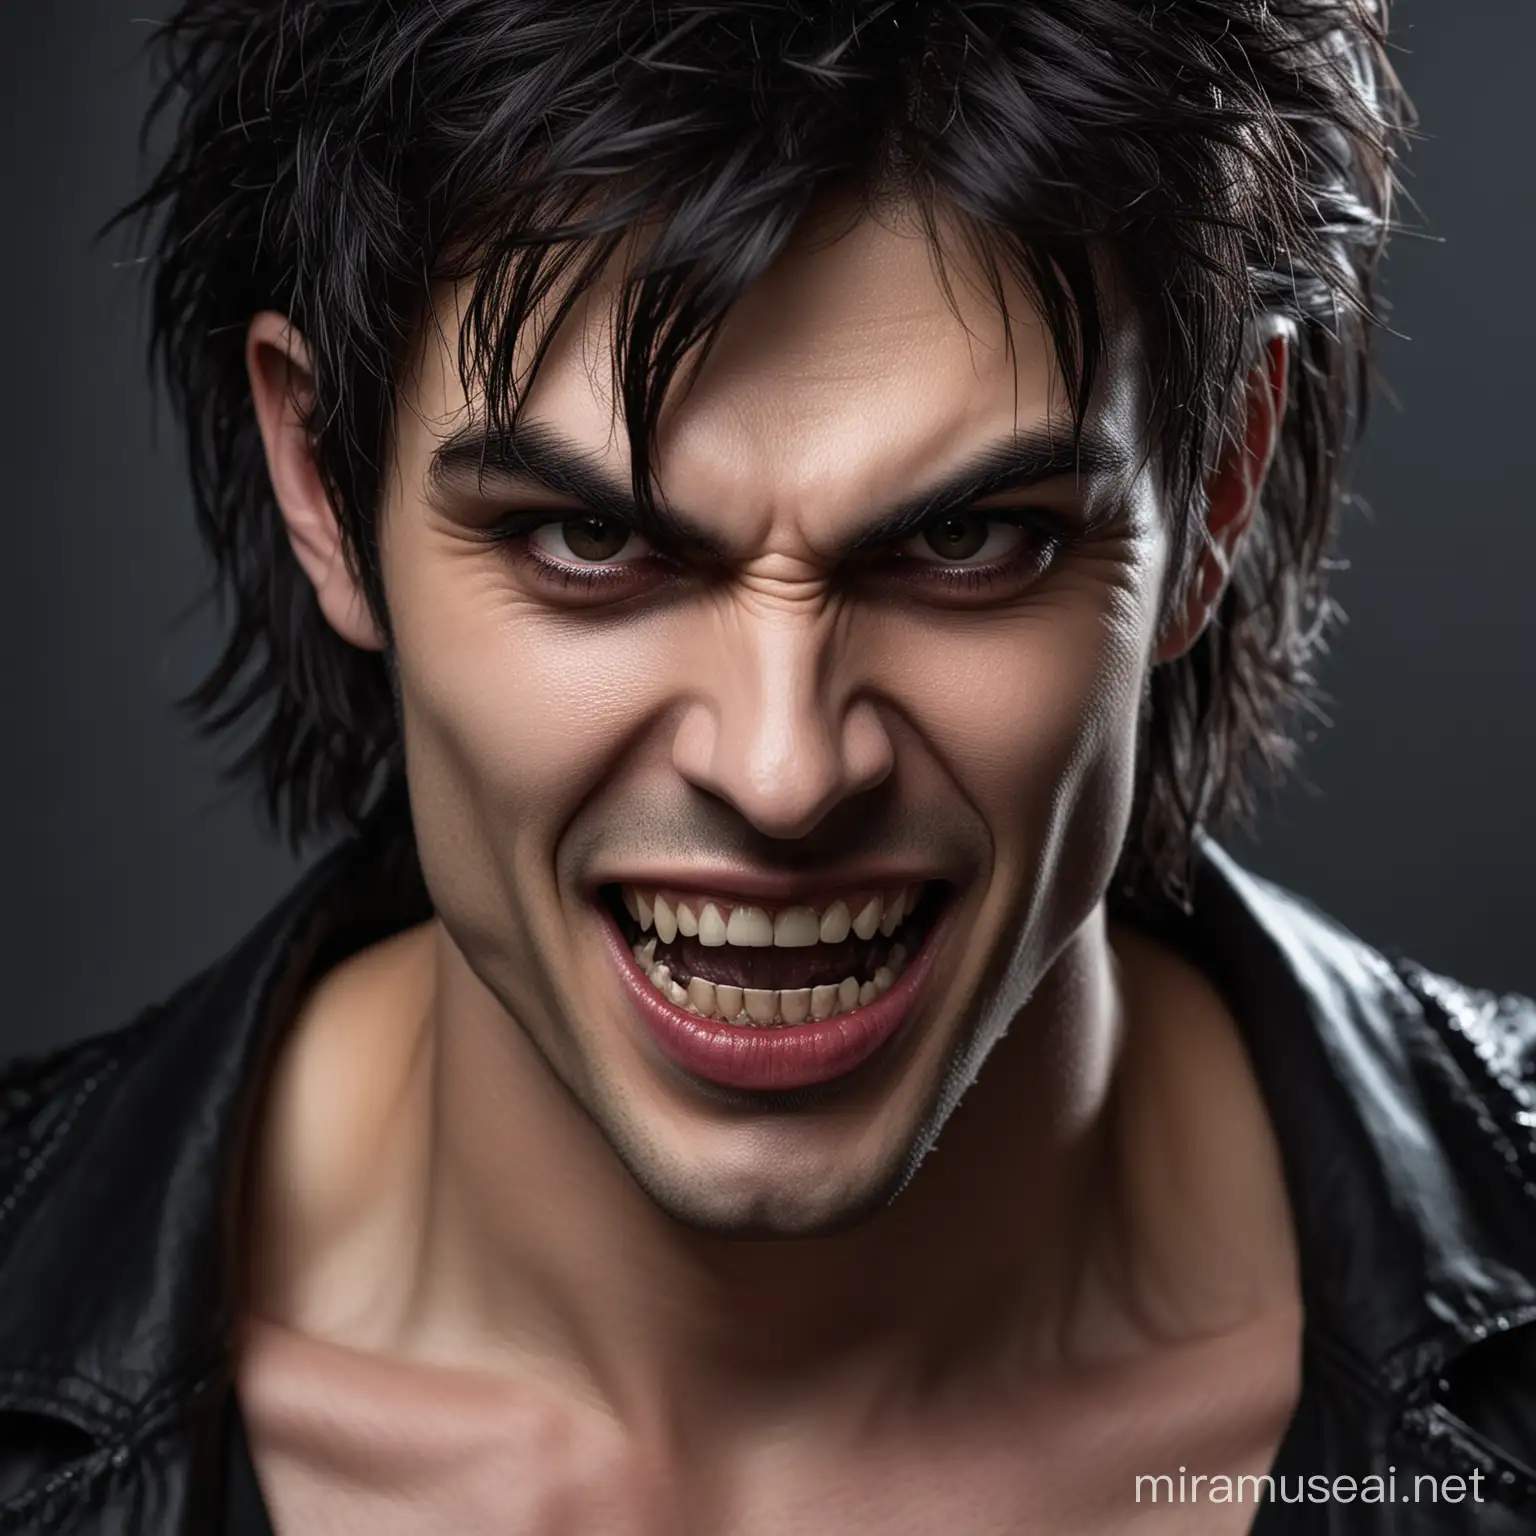 Intense CloseUp of DarkHaired Male Vampire with Fangs